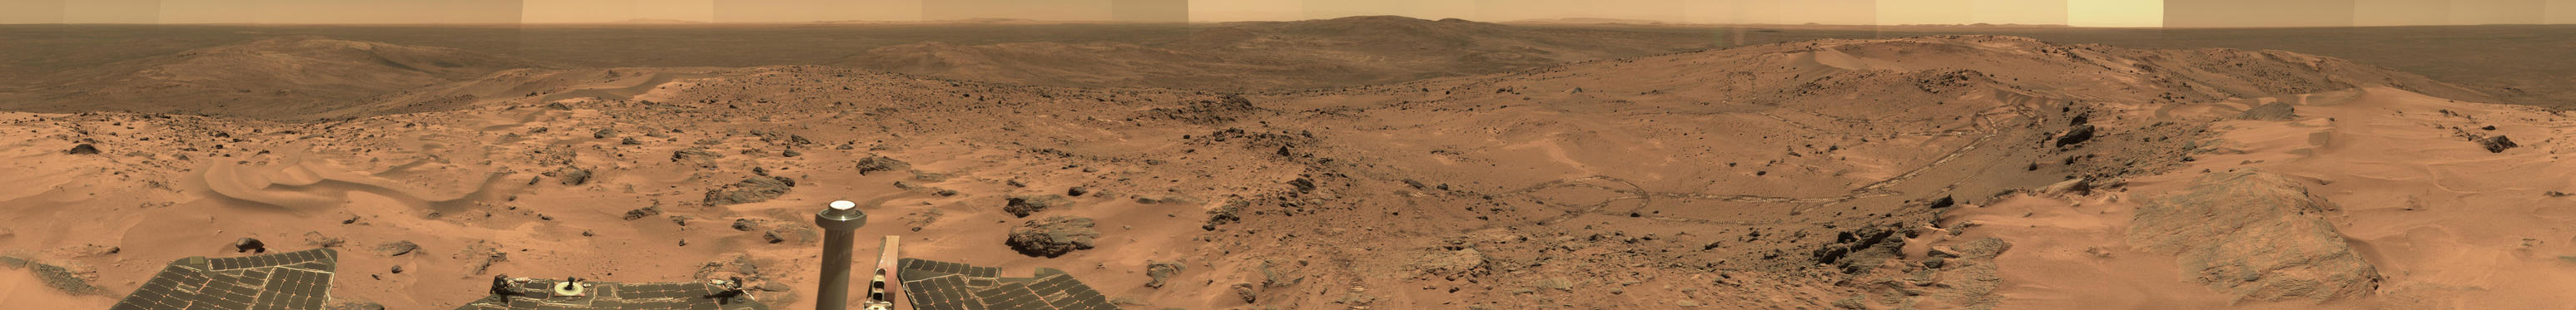 If a human with perfect vision donned a spacesuit and stepped onto the martian surface, the view would be as clear as this sweeping panorama taken by Spirit.